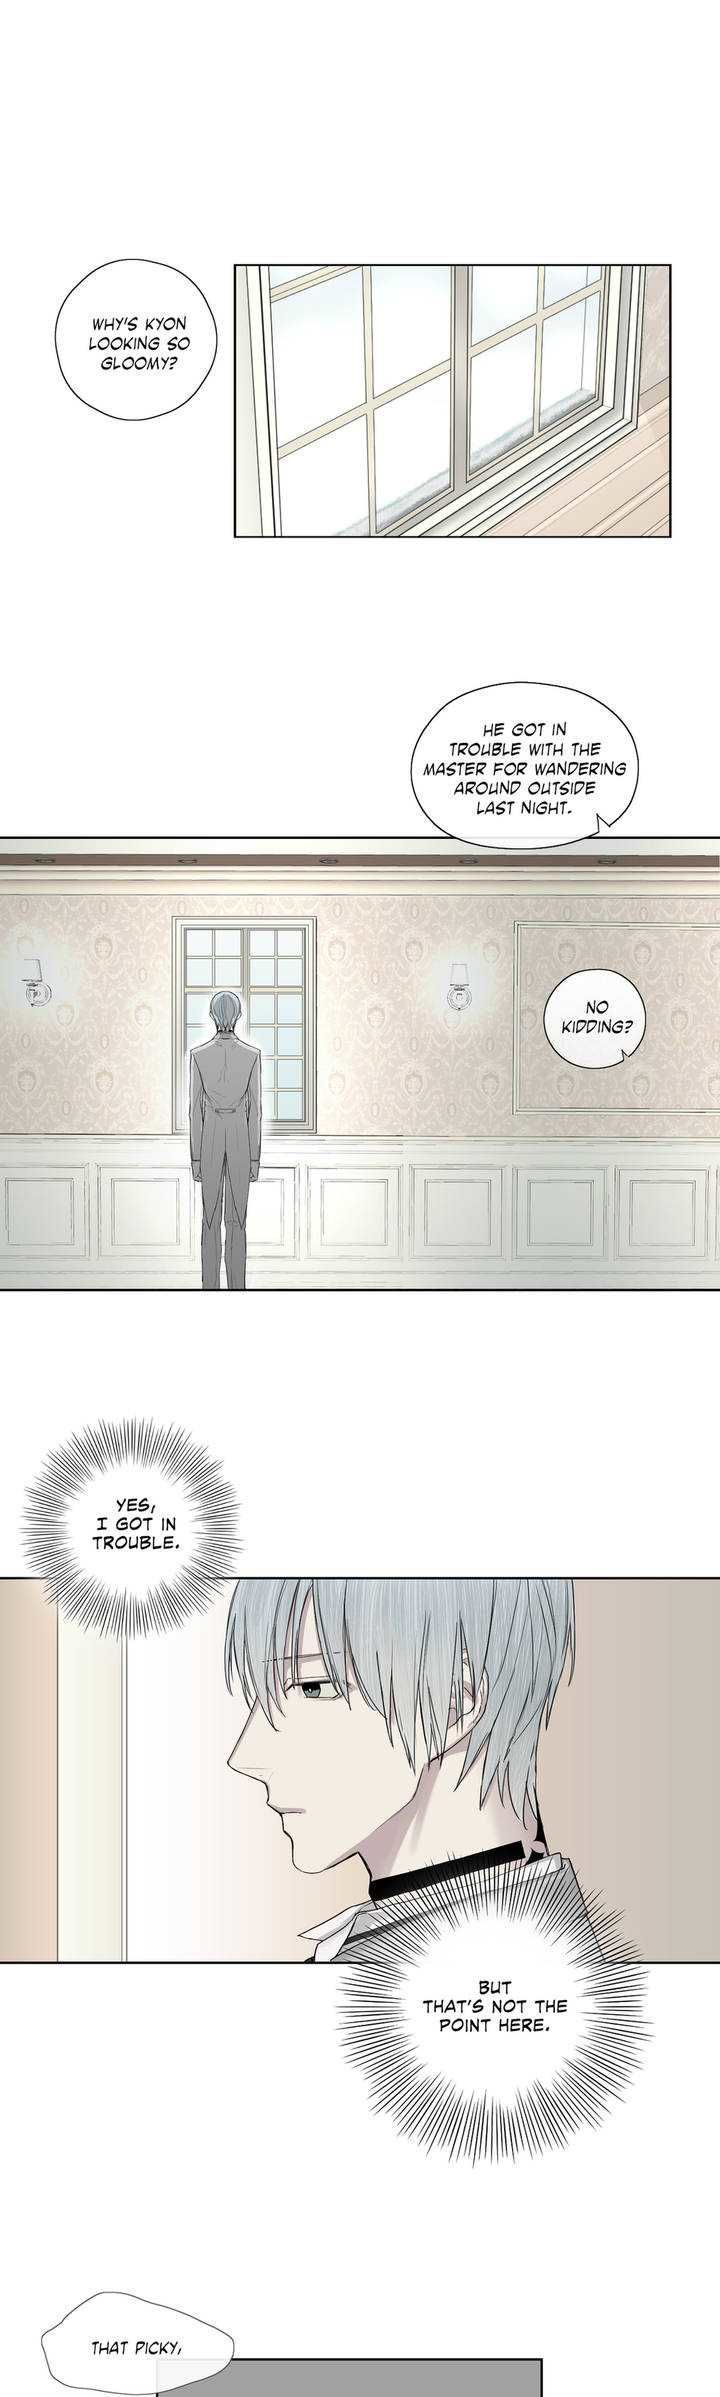 Royal Servant - Chapter 4 Page 1